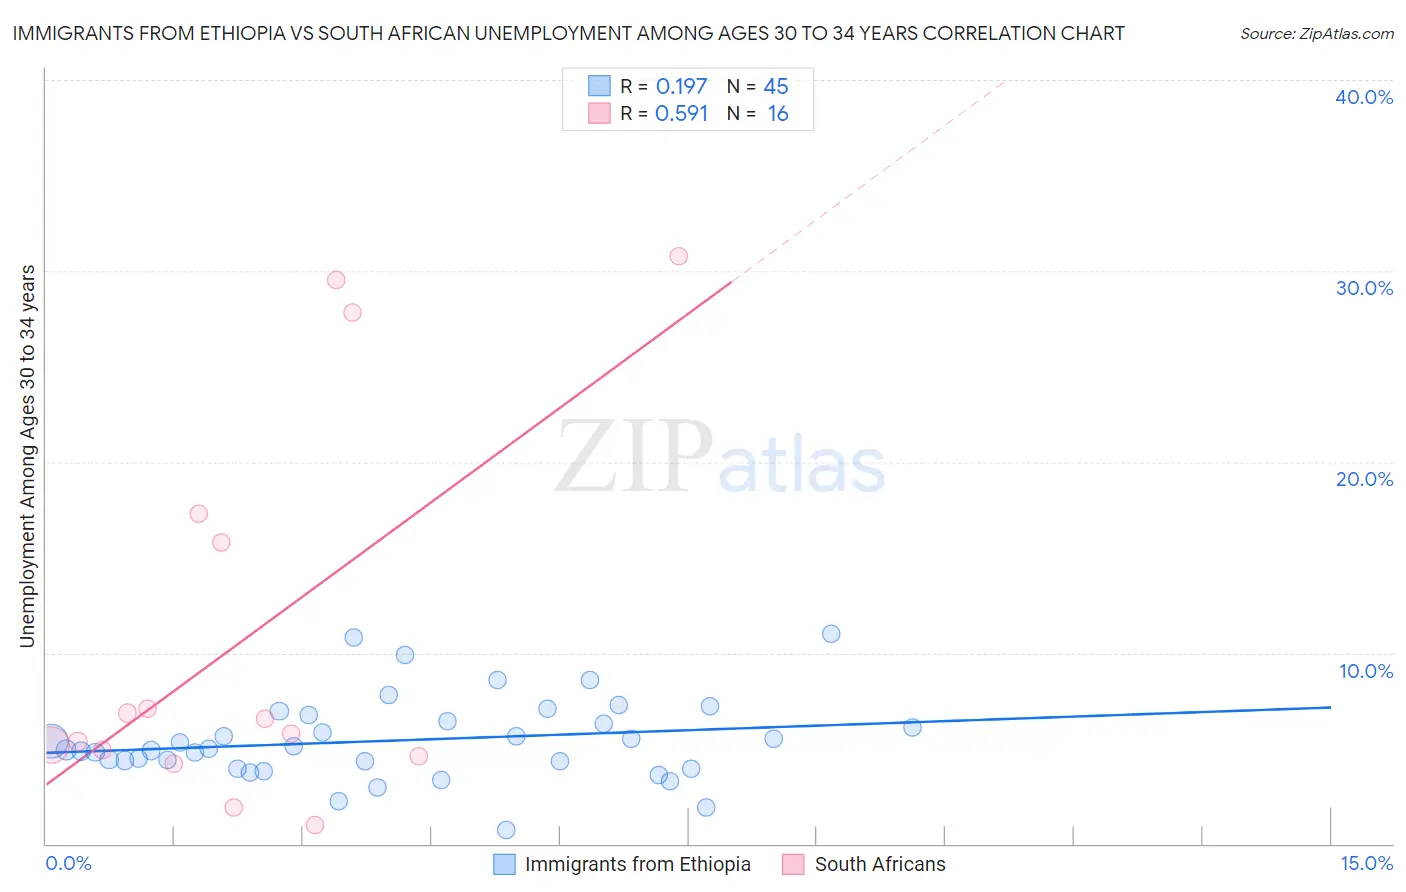 Immigrants from Ethiopia vs South African Unemployment Among Ages 30 to 34 years